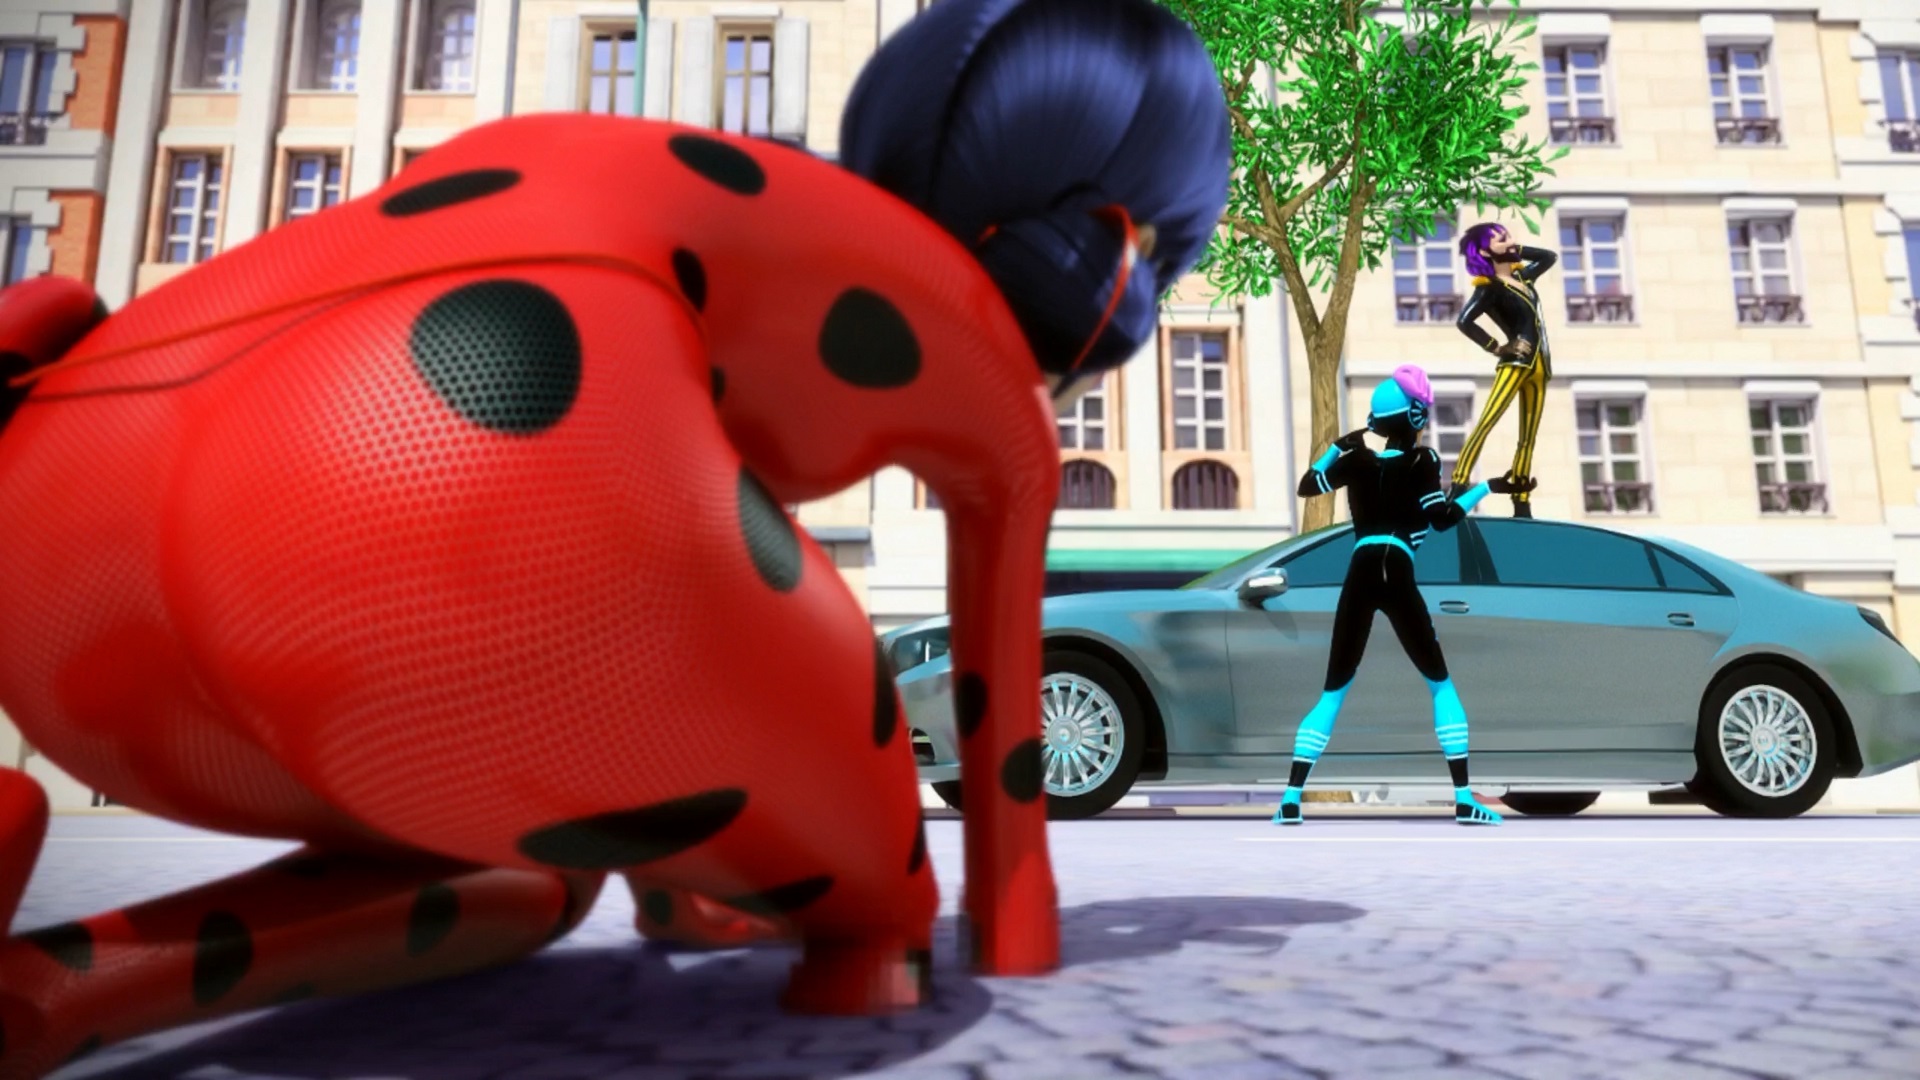 Miraculous Ladybug- Title Confusion Edition.